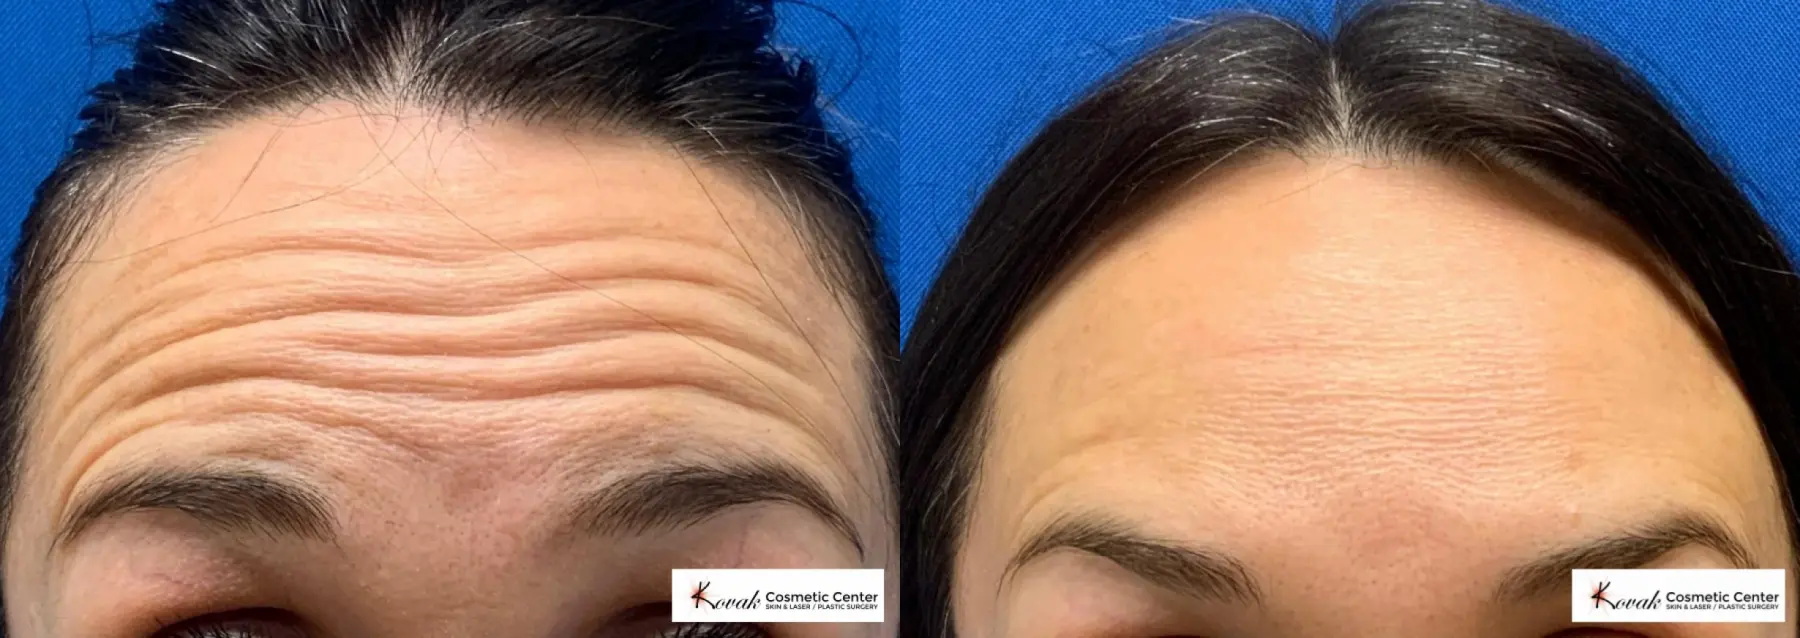 Neurotox Treatment using Jeuveau for forehead wrinkles on a 40 year old female - Before and After  